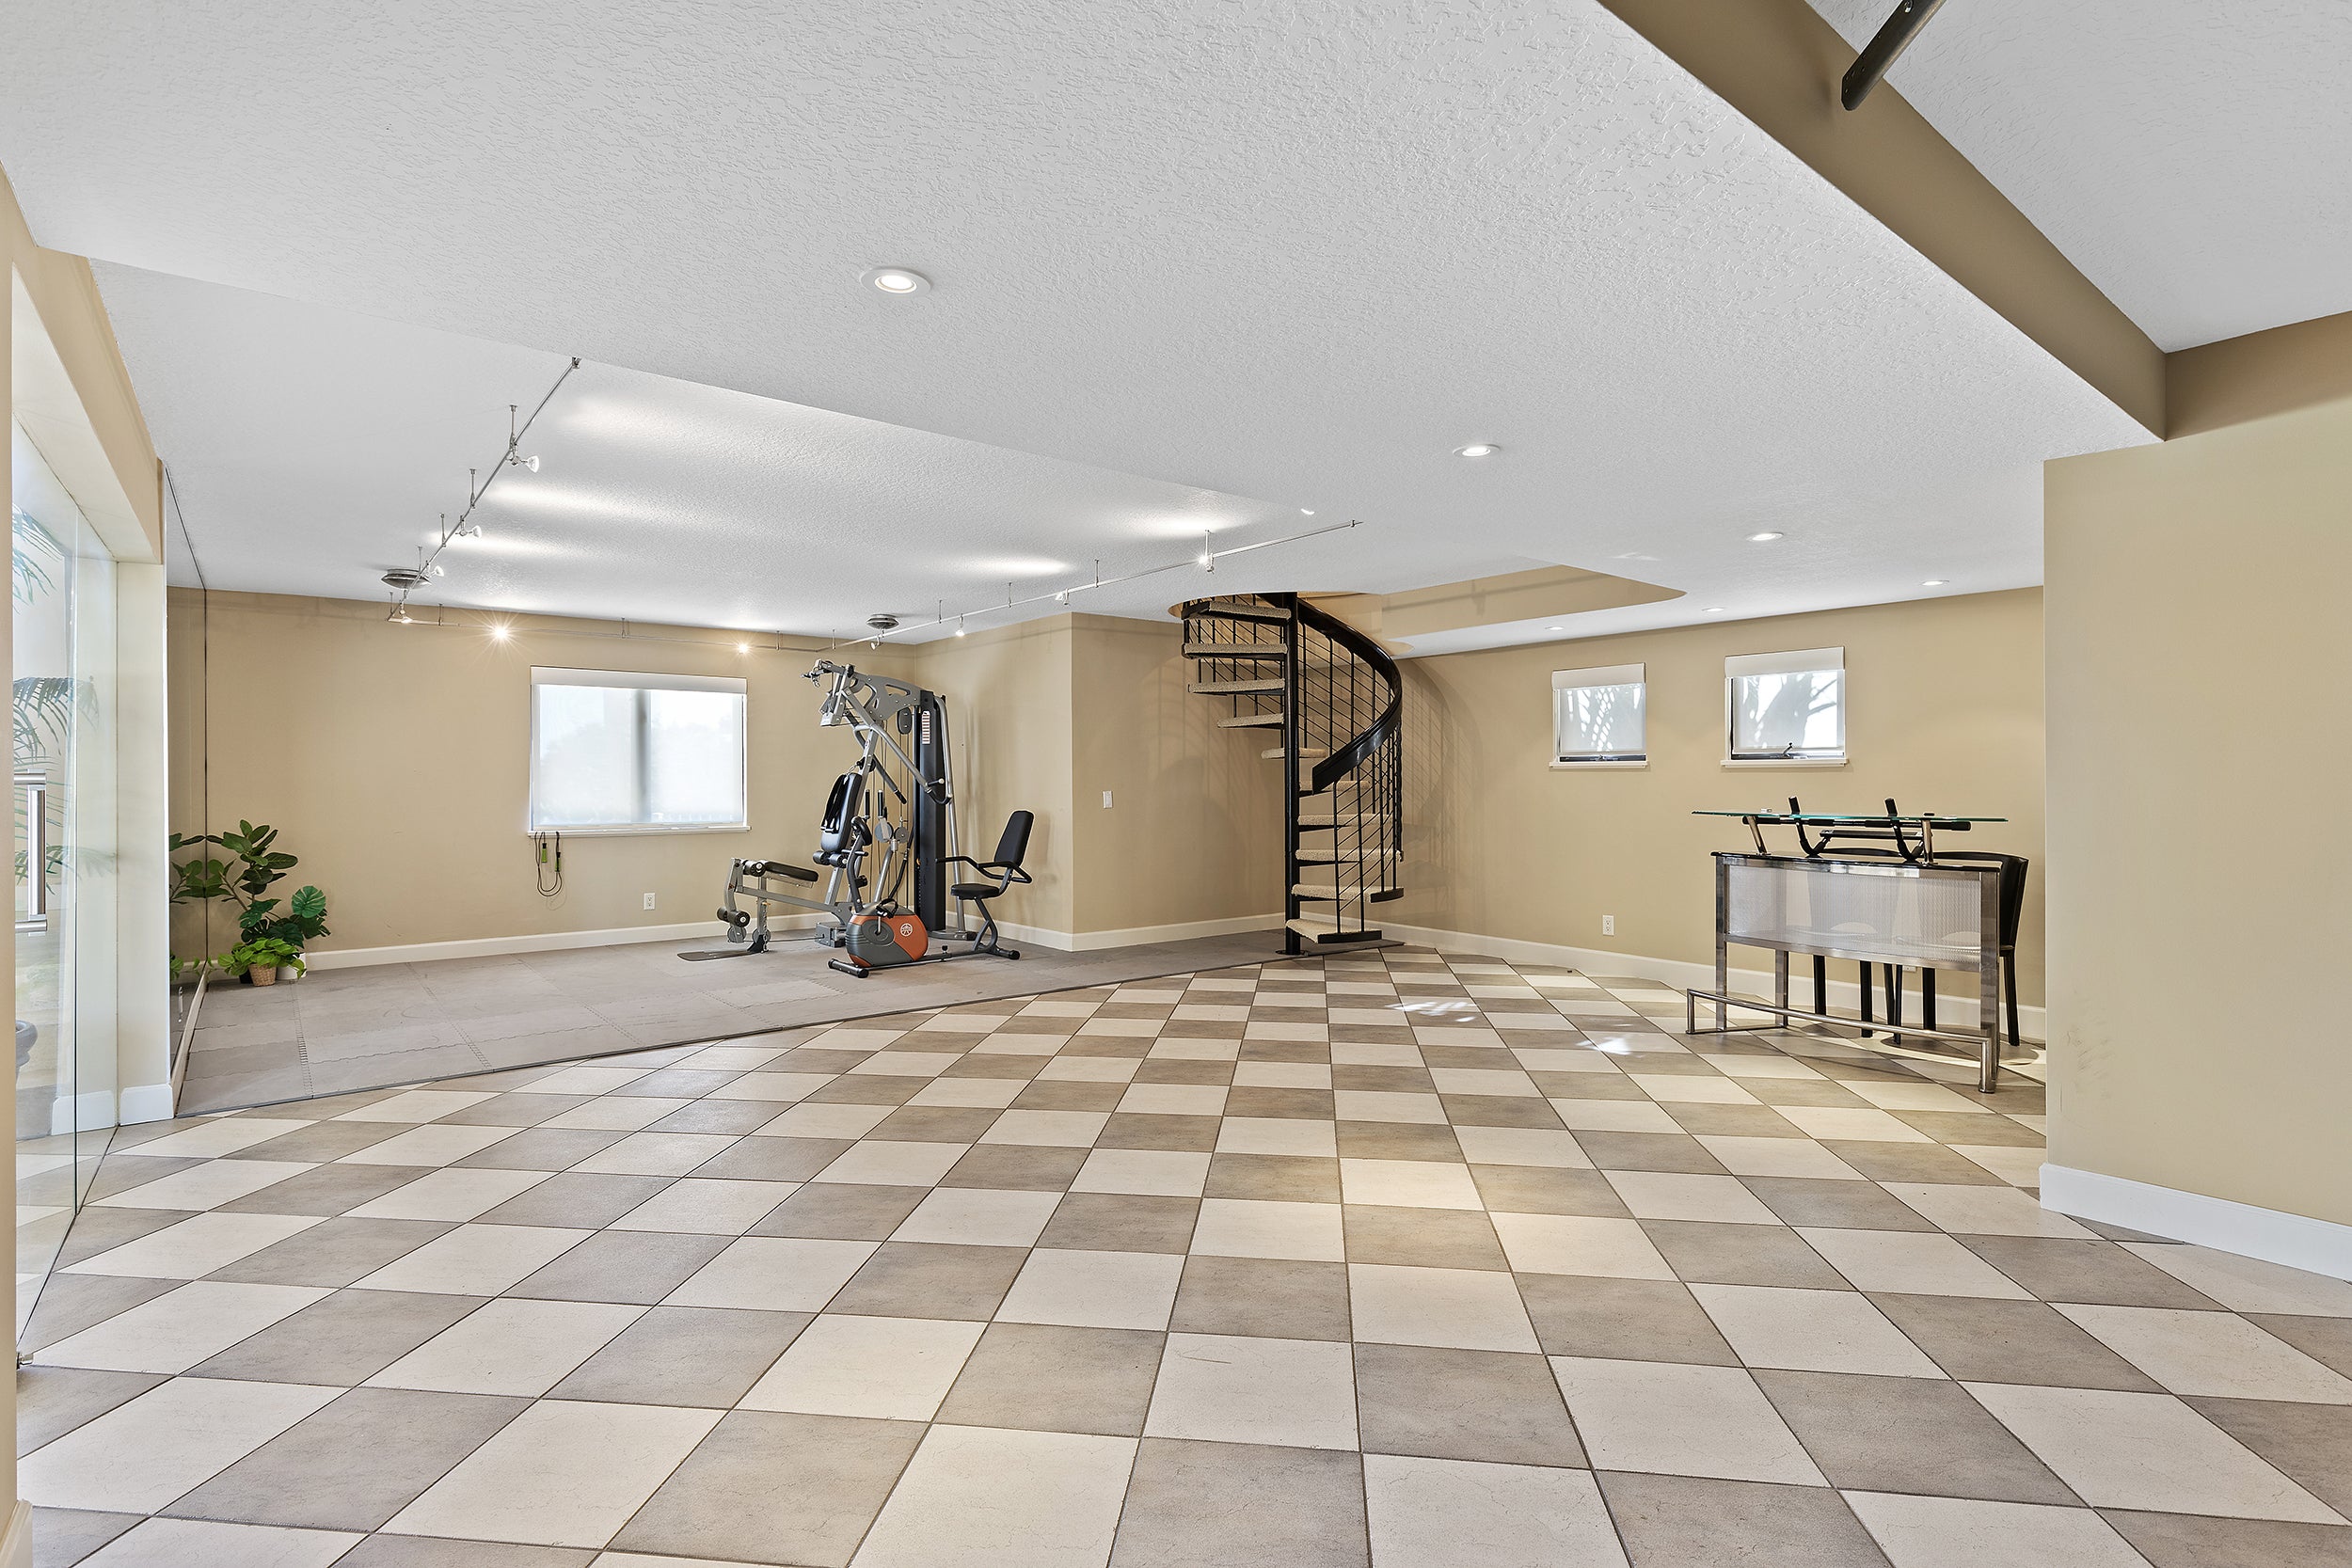 Huge garage, exercise machine, and spiral staircase